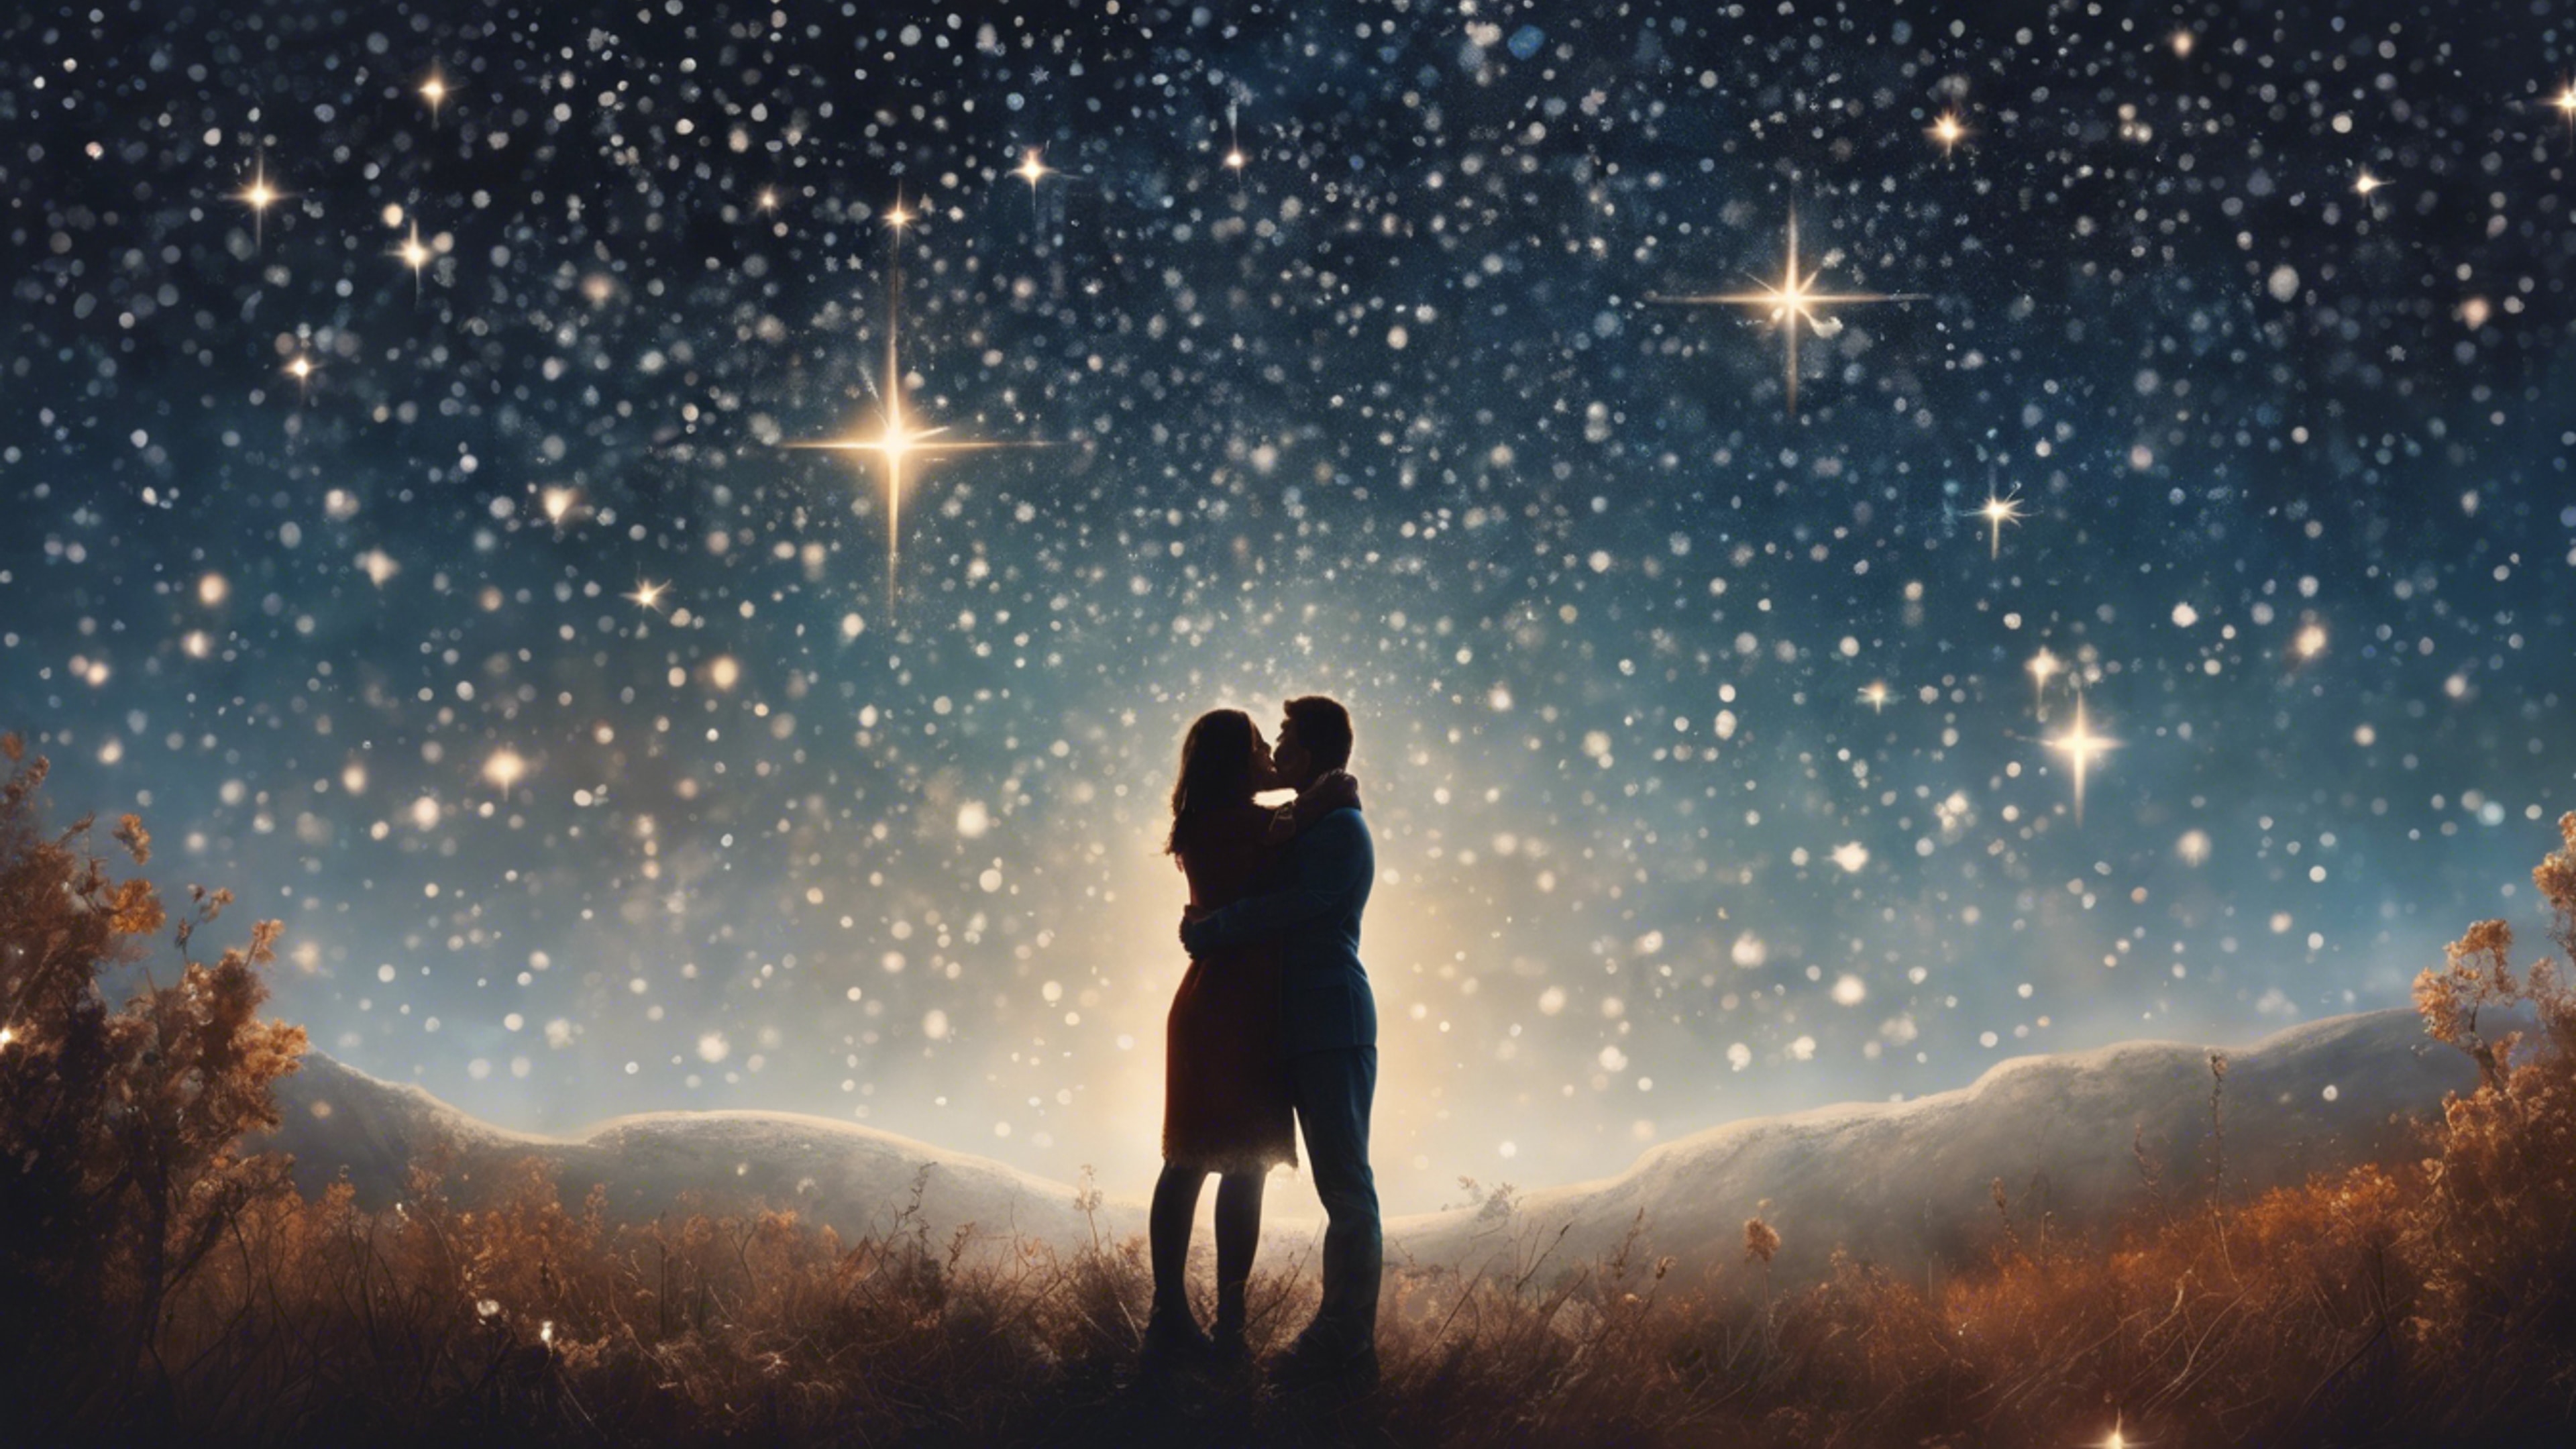 A timeless painting of a couple sharing a romantic moment under a star-filled sky. Sfondo[26fb6f637c3e4c759c8d]